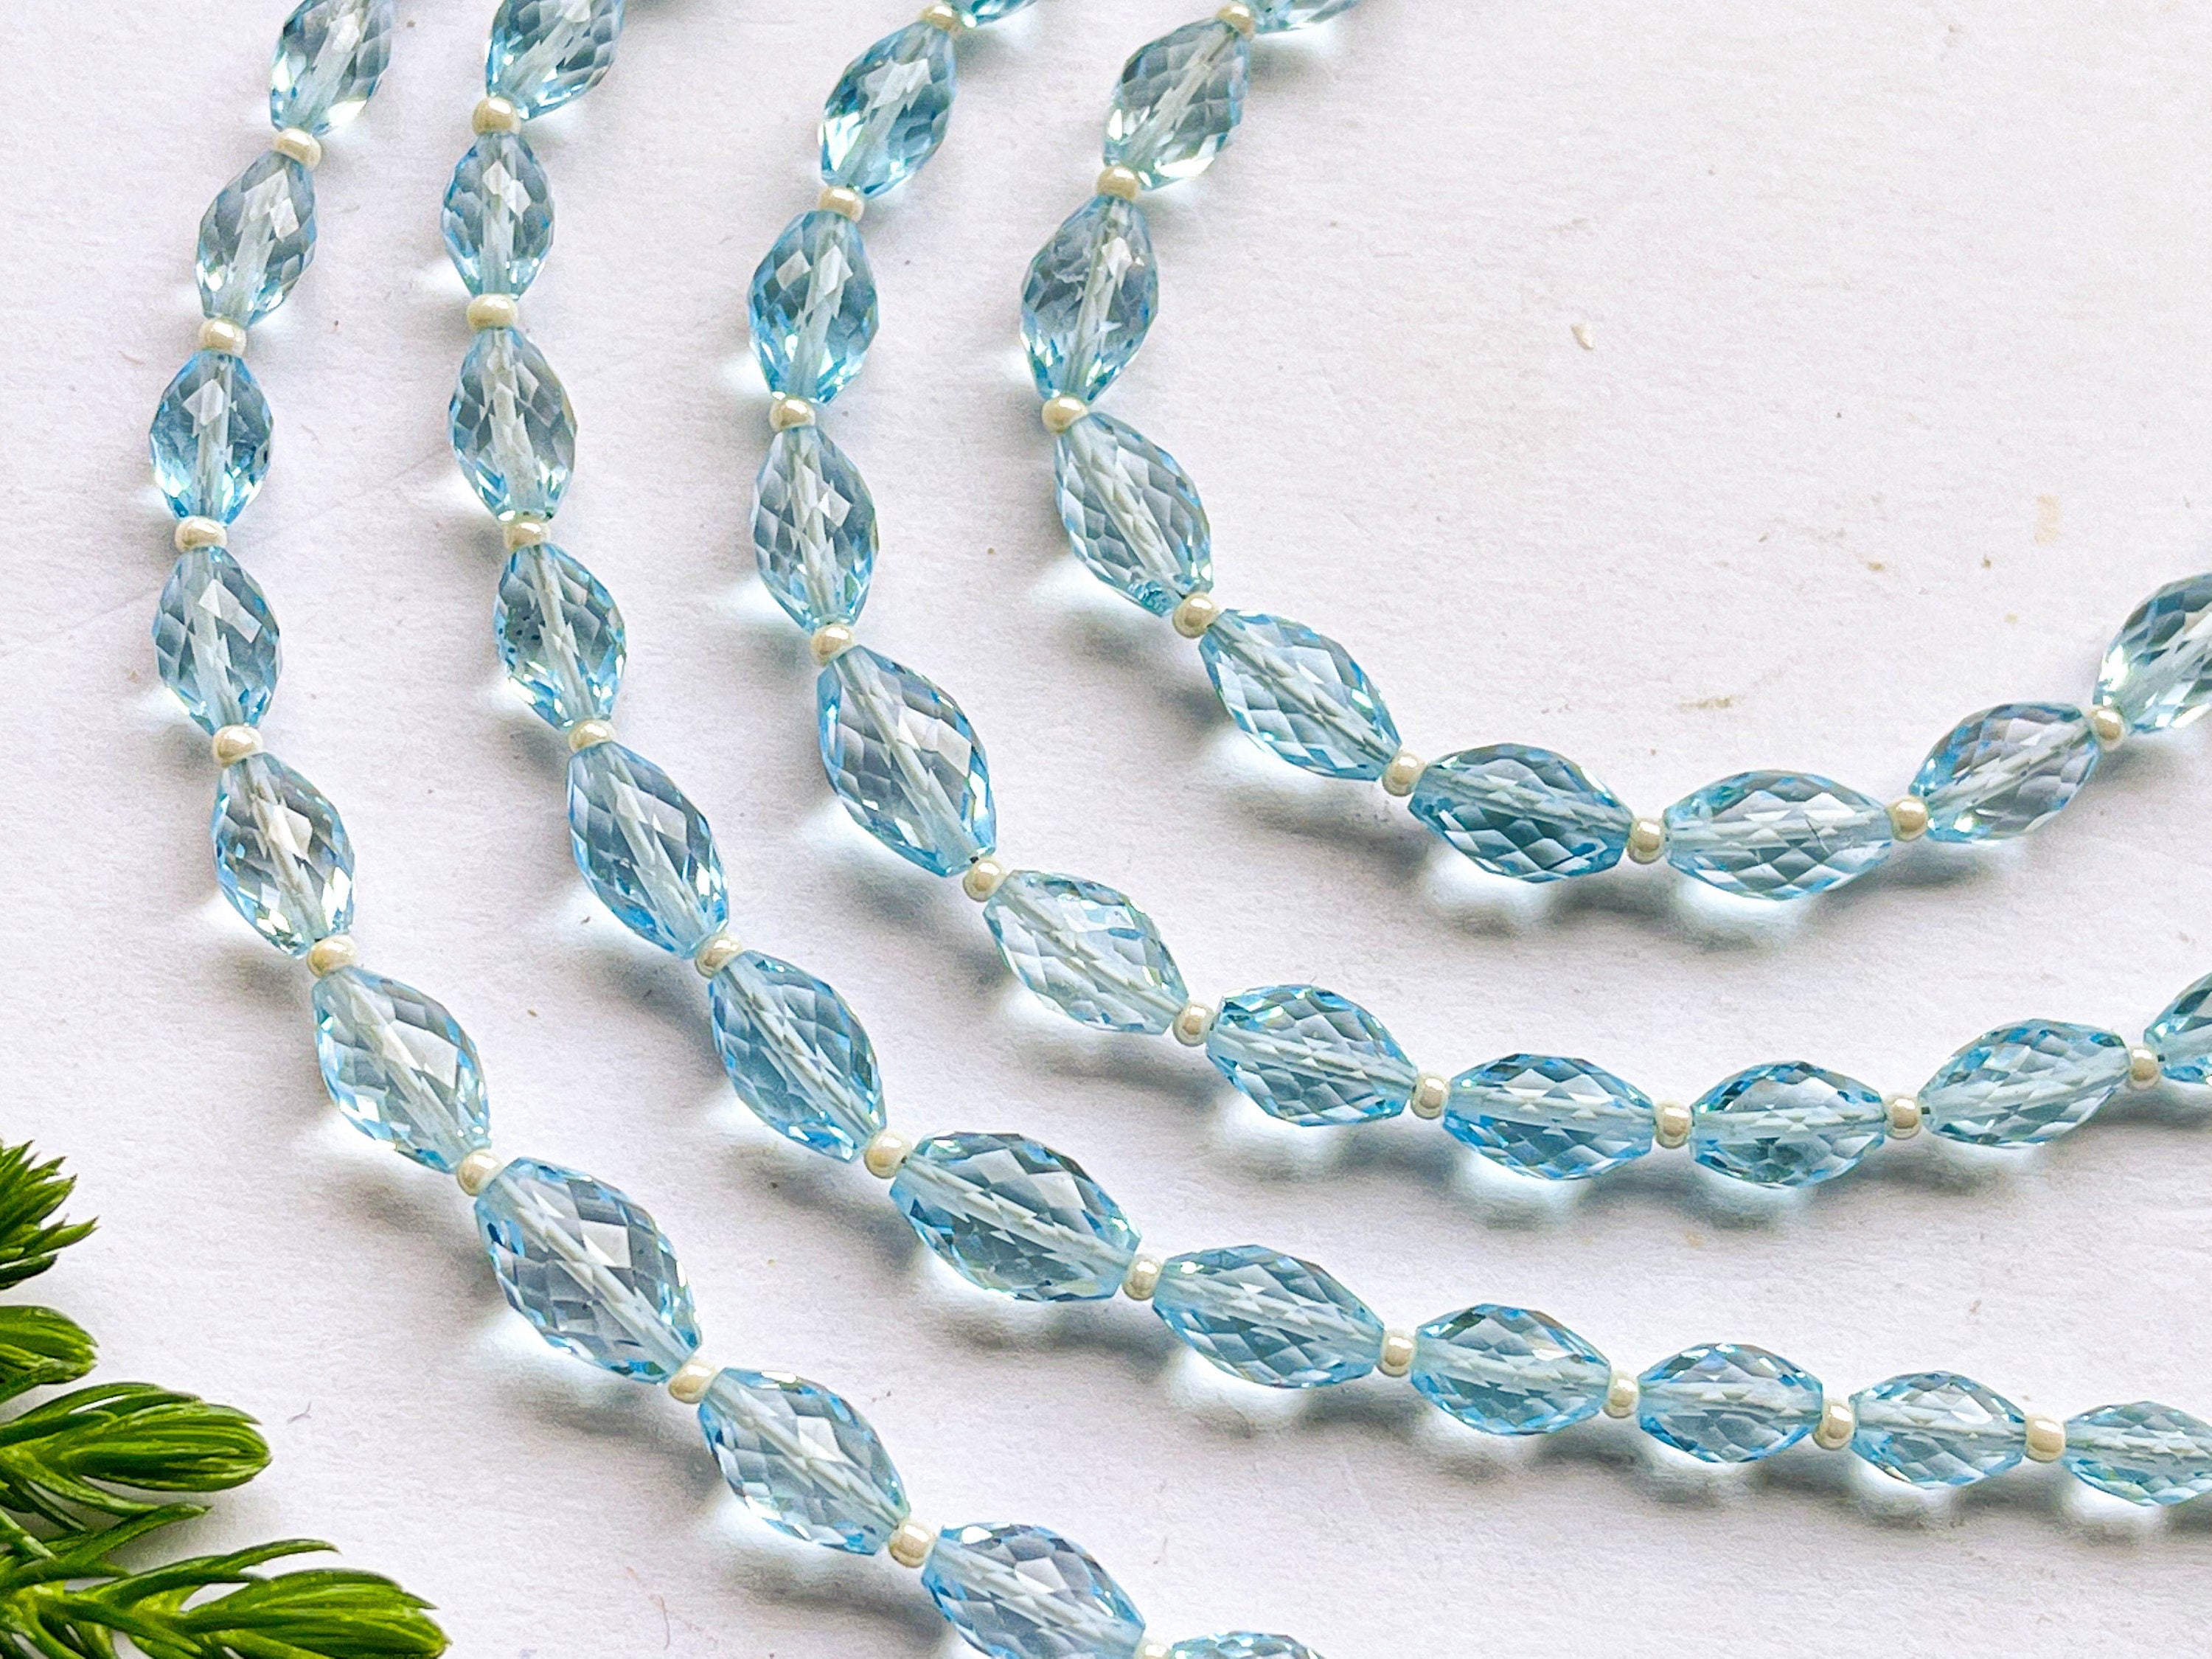 8" BLUE TOPAZ Olive Shape Faceted Beads, Natural Blue Topaz beads, Blue Topaz For jewelry making, Blue Topaz Gemstone Beads, 4x6mm to 6x9mm - Beadsforyourjewelry